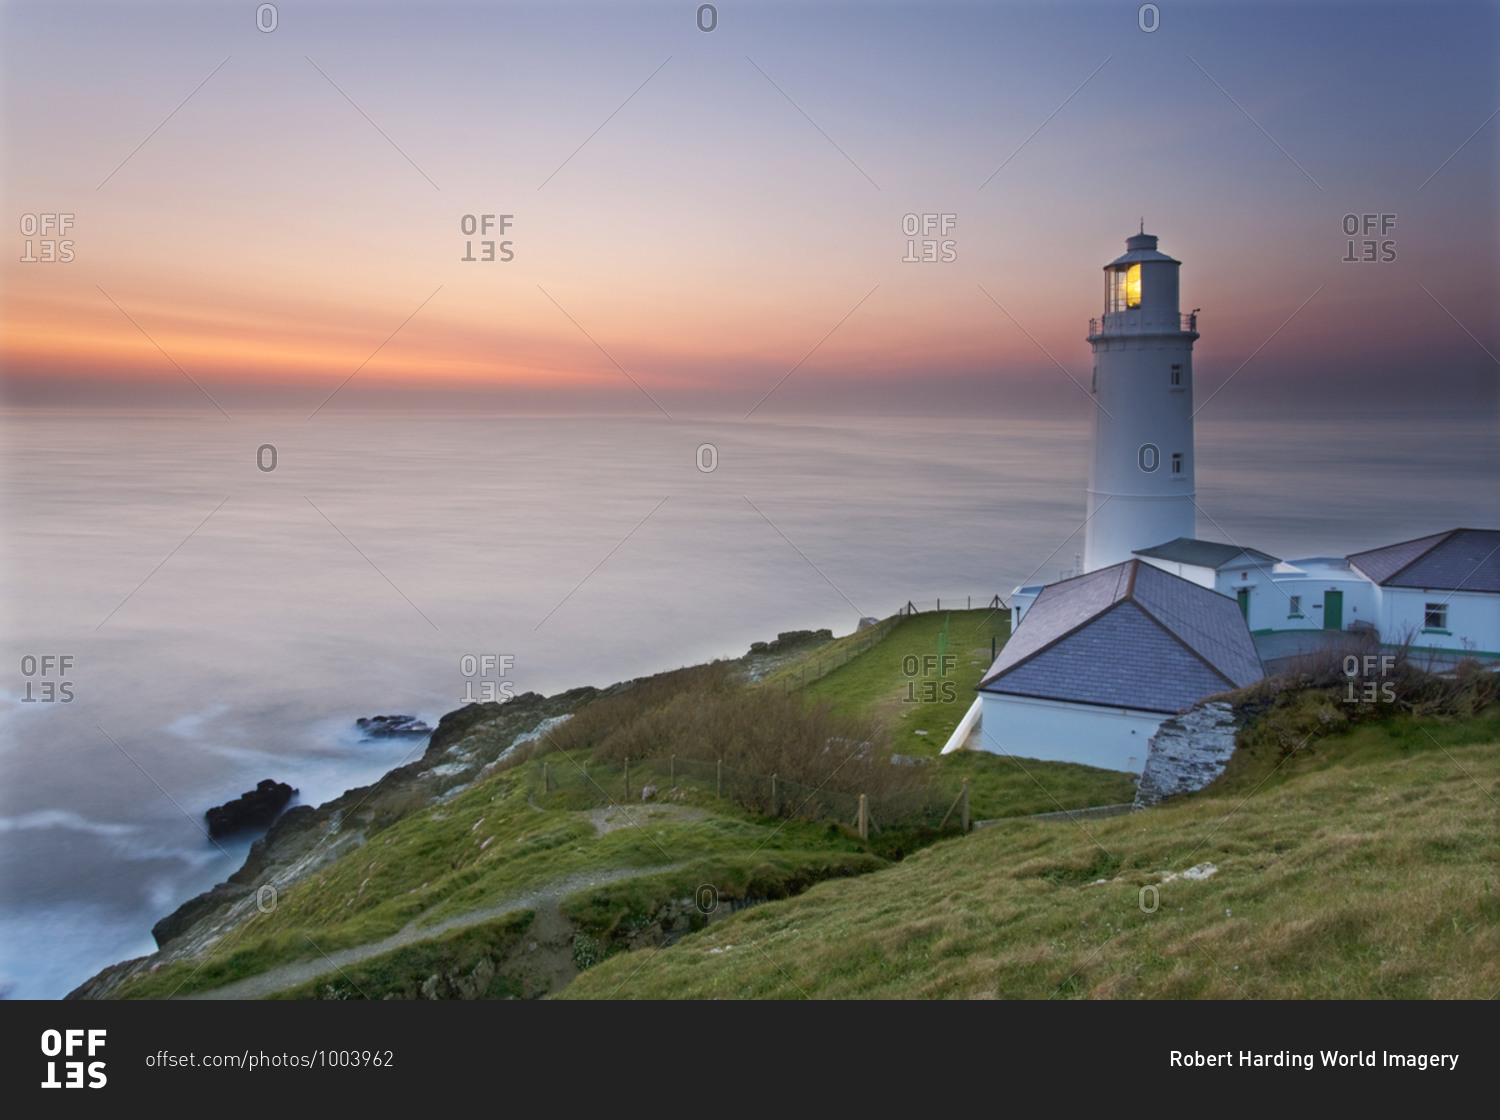 A peaceful dusk on Cornwall's Atlantic coast, showing the
lighthouse at Trevose Head, near Padstow, Cornwall, England, United
Kingdom, Europe stock photo - OFFSET